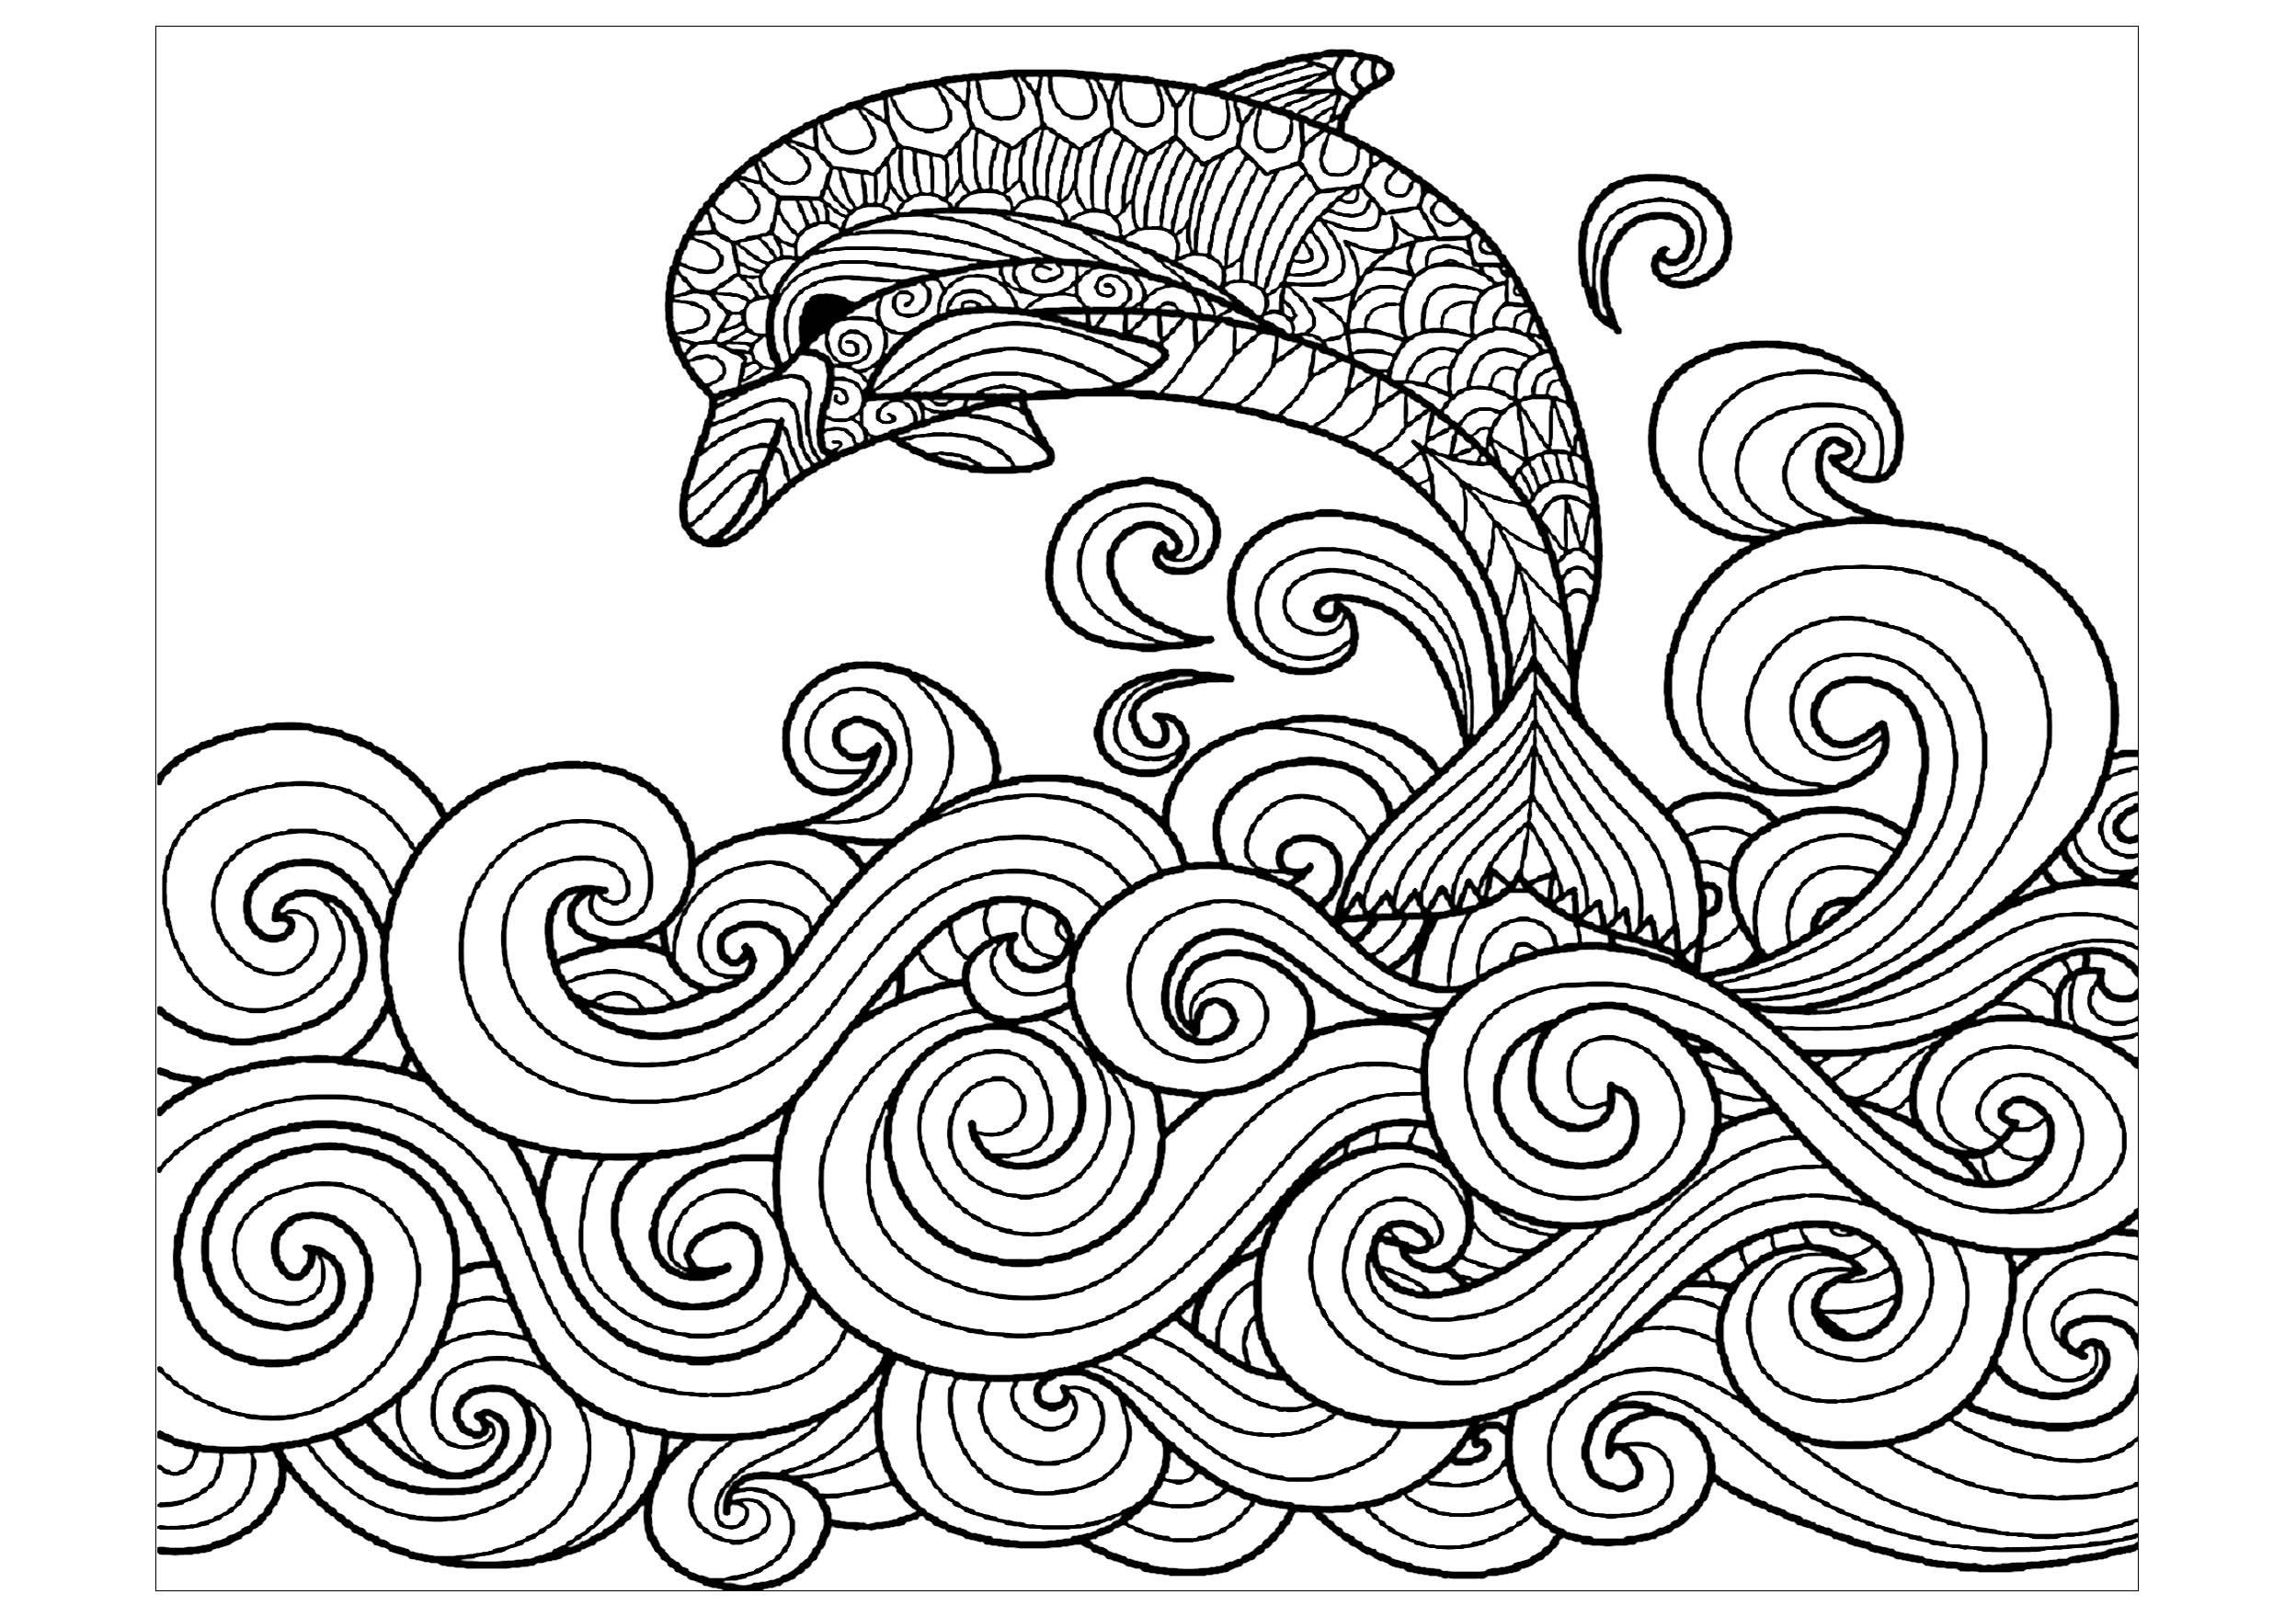 Ocean Waves Coloring Pages For Adults
 Dolphin waves Dolphins Adult Coloring Pages